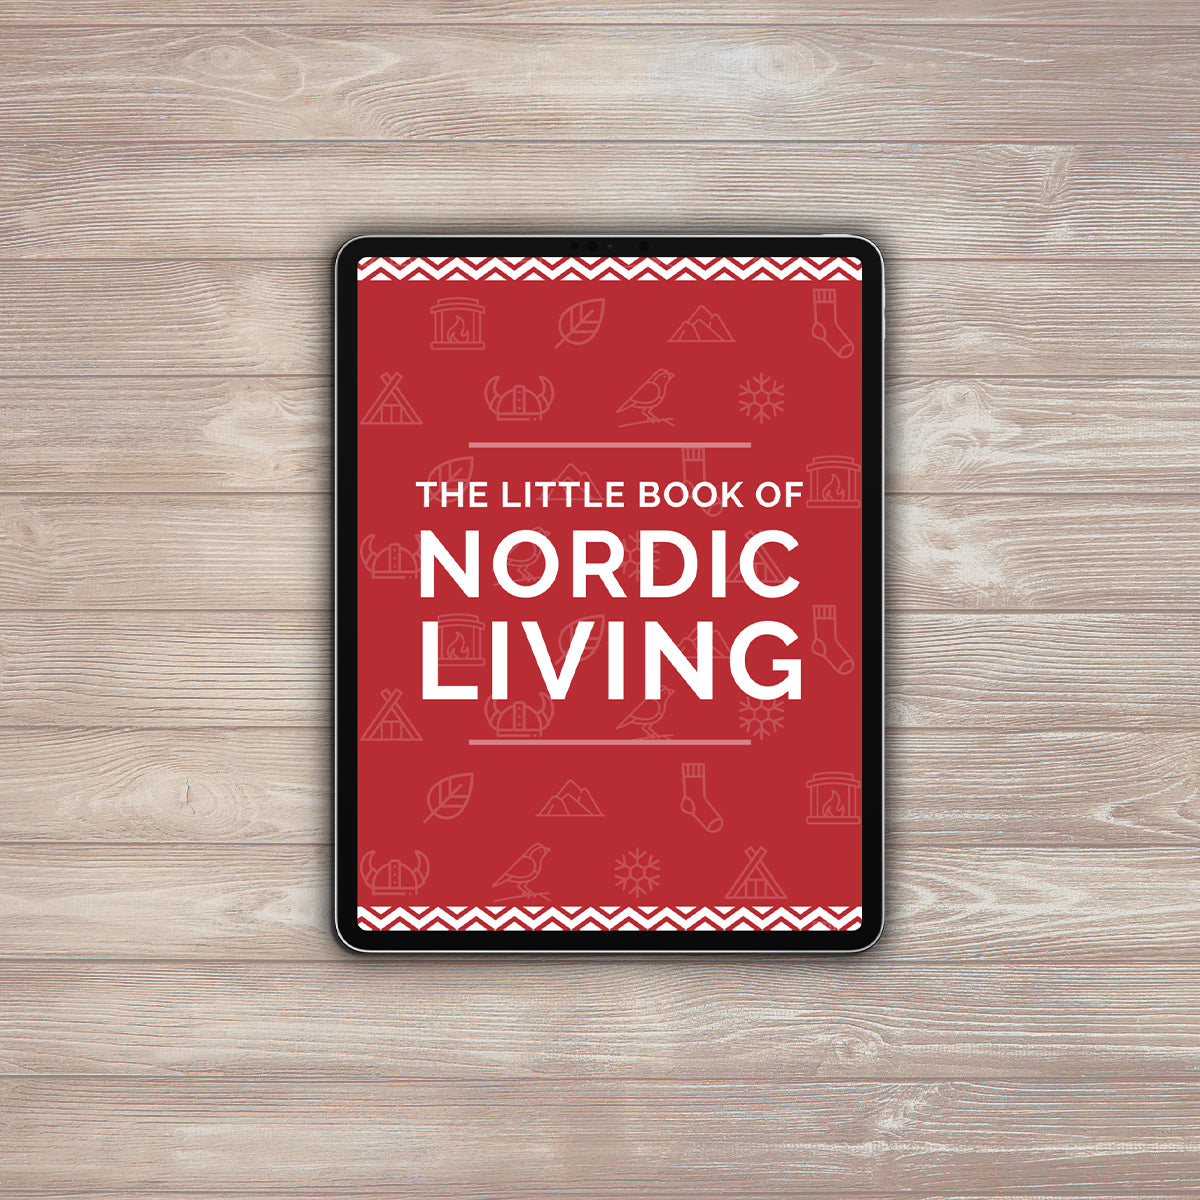 eBook - THE LITTLE BOOK OF NORDIC LIVING